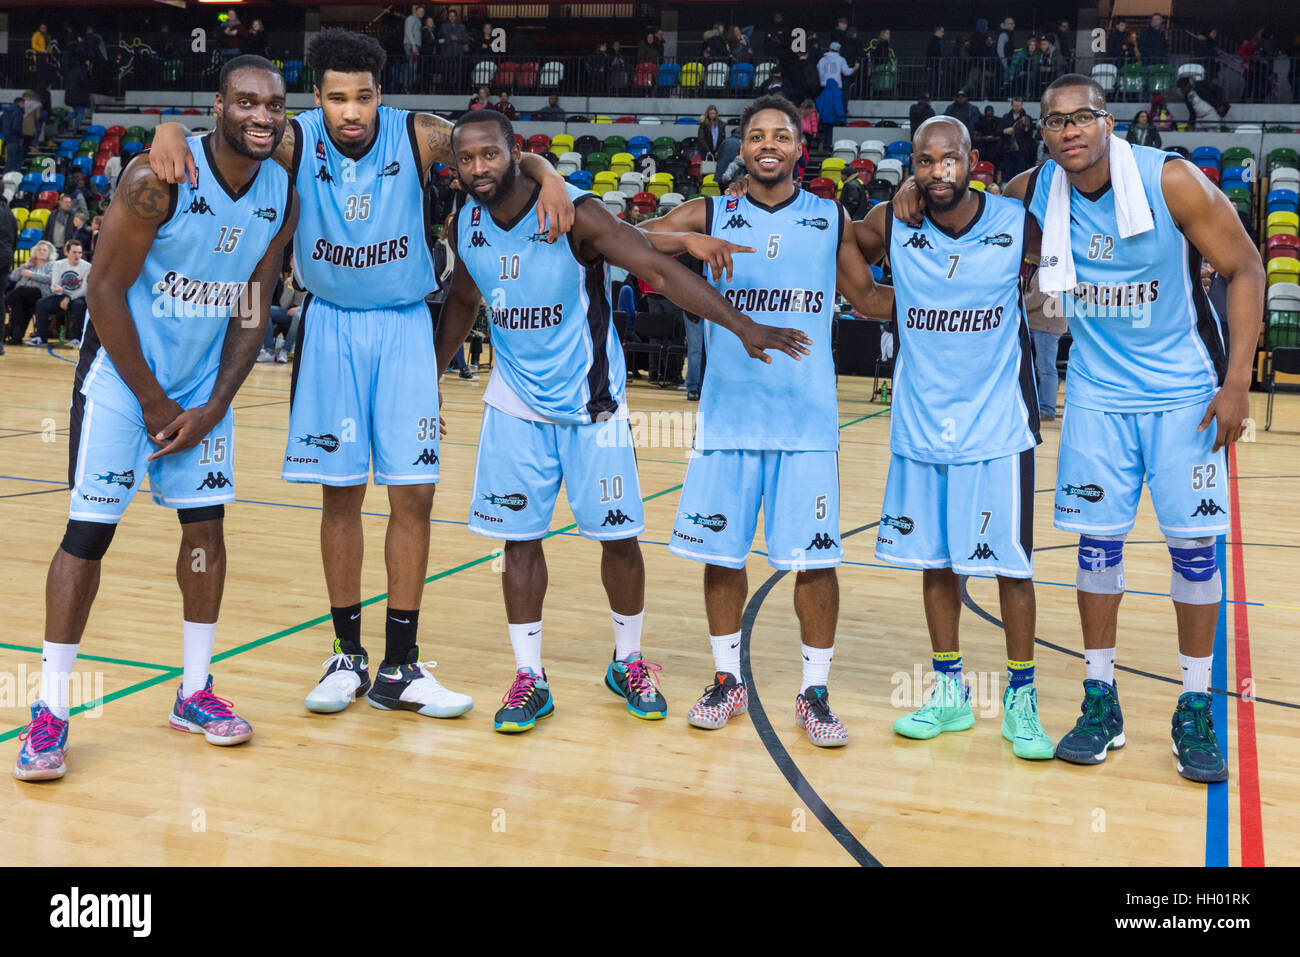 London, UK. 14th January, 2017. Surrey players (left to right) Ogedengbe (15), Rollins (35), Margai (10) Taylor (5), Popoola (7) and Ochereobia (52)  celebrate their win. Tensions run high in the BBL Trophy basketball game between home team London Lions and visitors Surrey Scorchers as both teams try to get to the next round of the Trophy. Scorchers pinch the game in the last 20 seconds and win 88-87 over the Lions. Credit: Imageplotter News and Sports/Alamy Live News Stock Photo